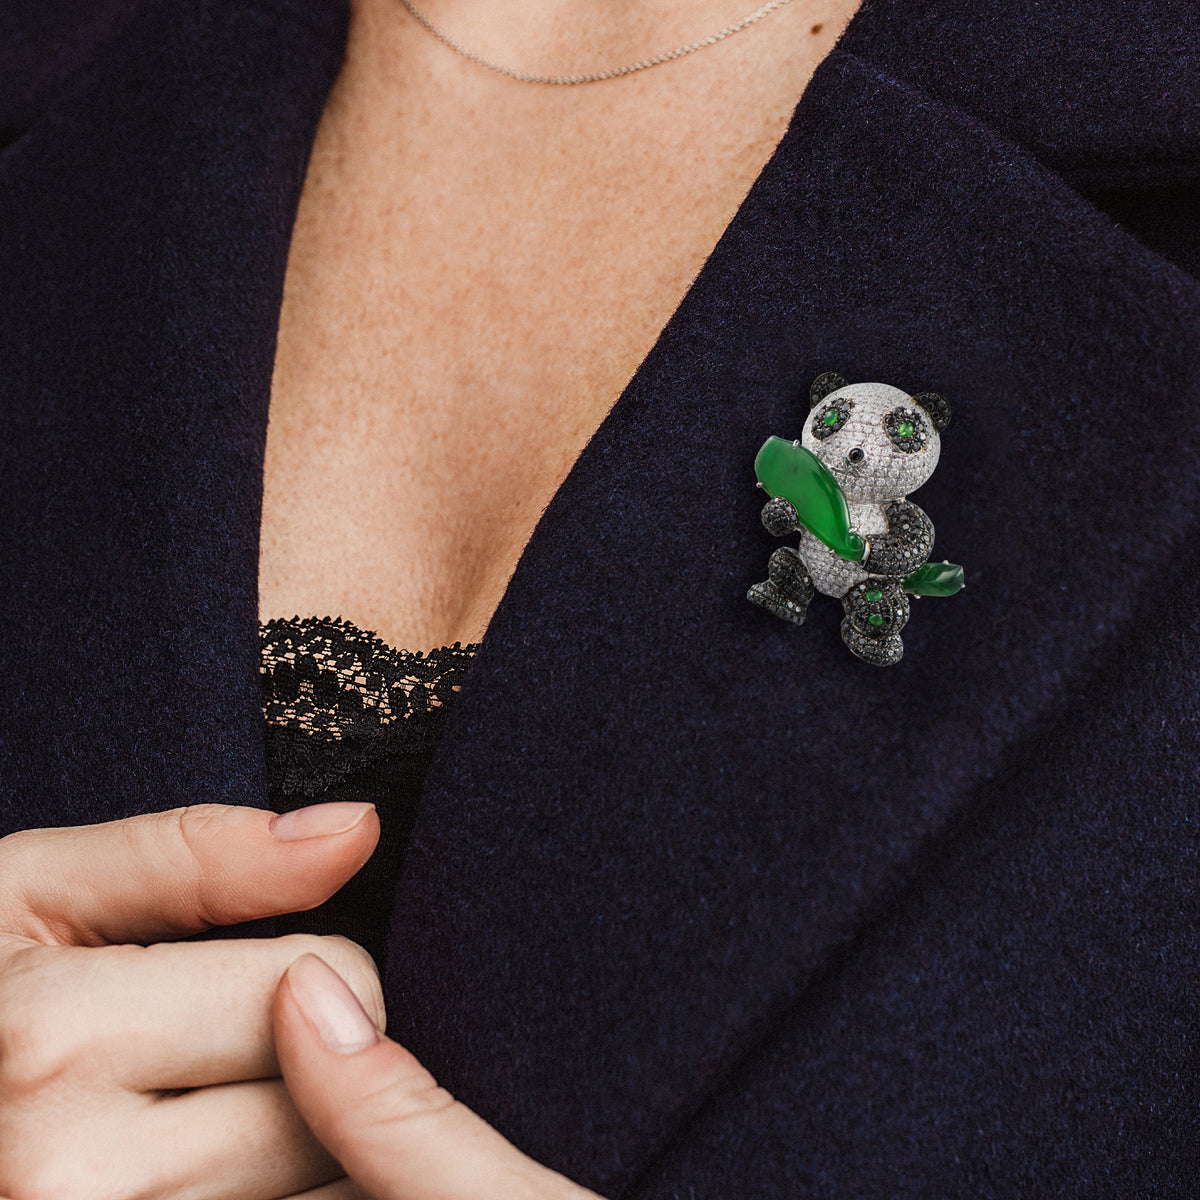 Woman wearing jade and diamond statement brooch on her suit